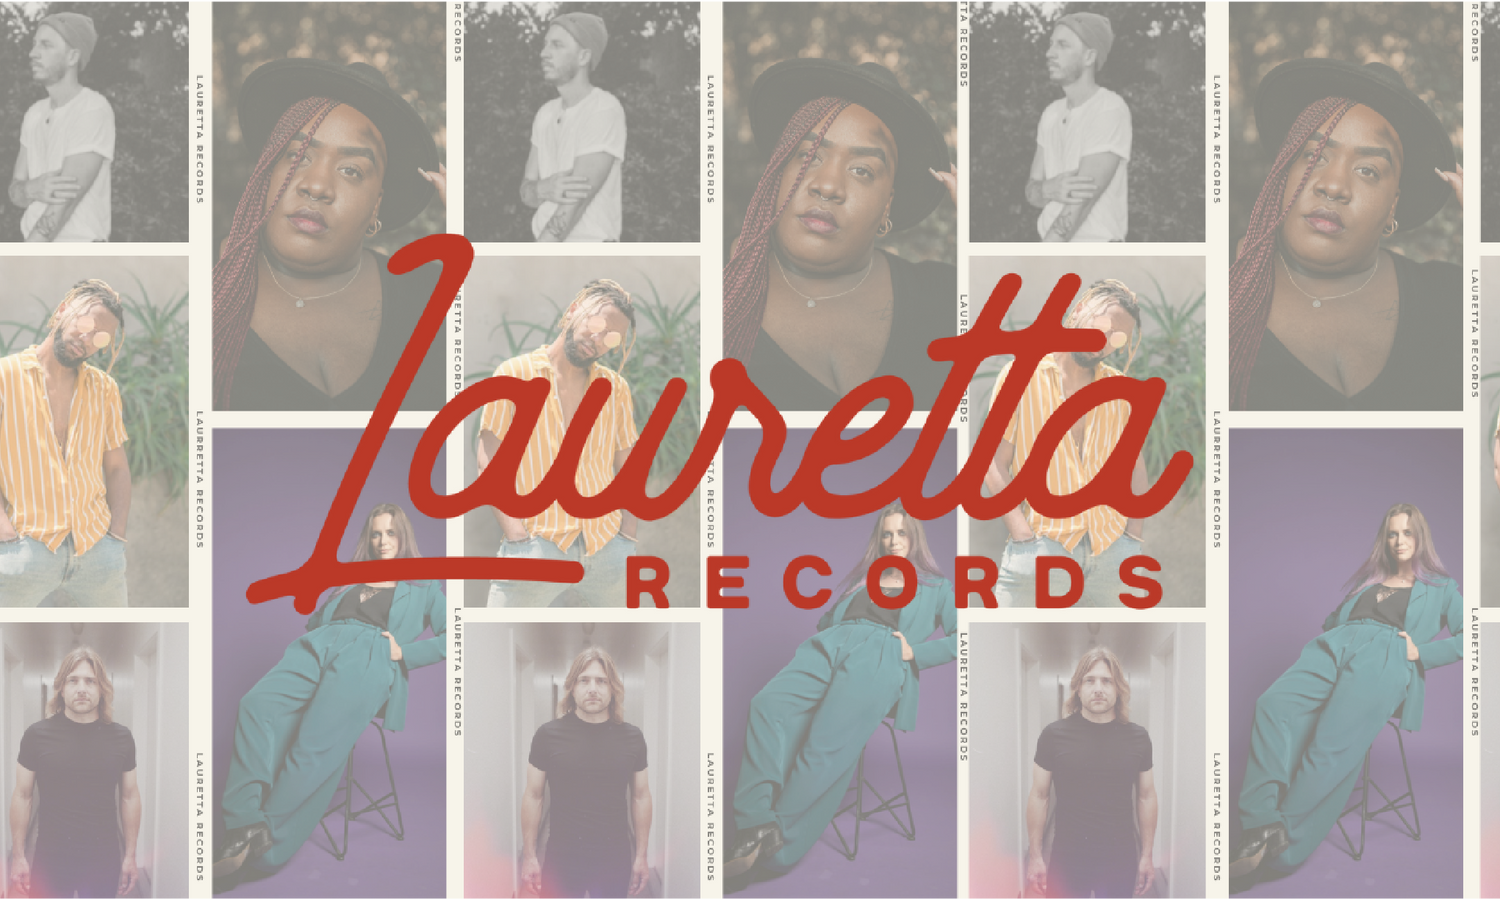 Redefining the Record Label with Lauretta Records in Los Angeles, CA